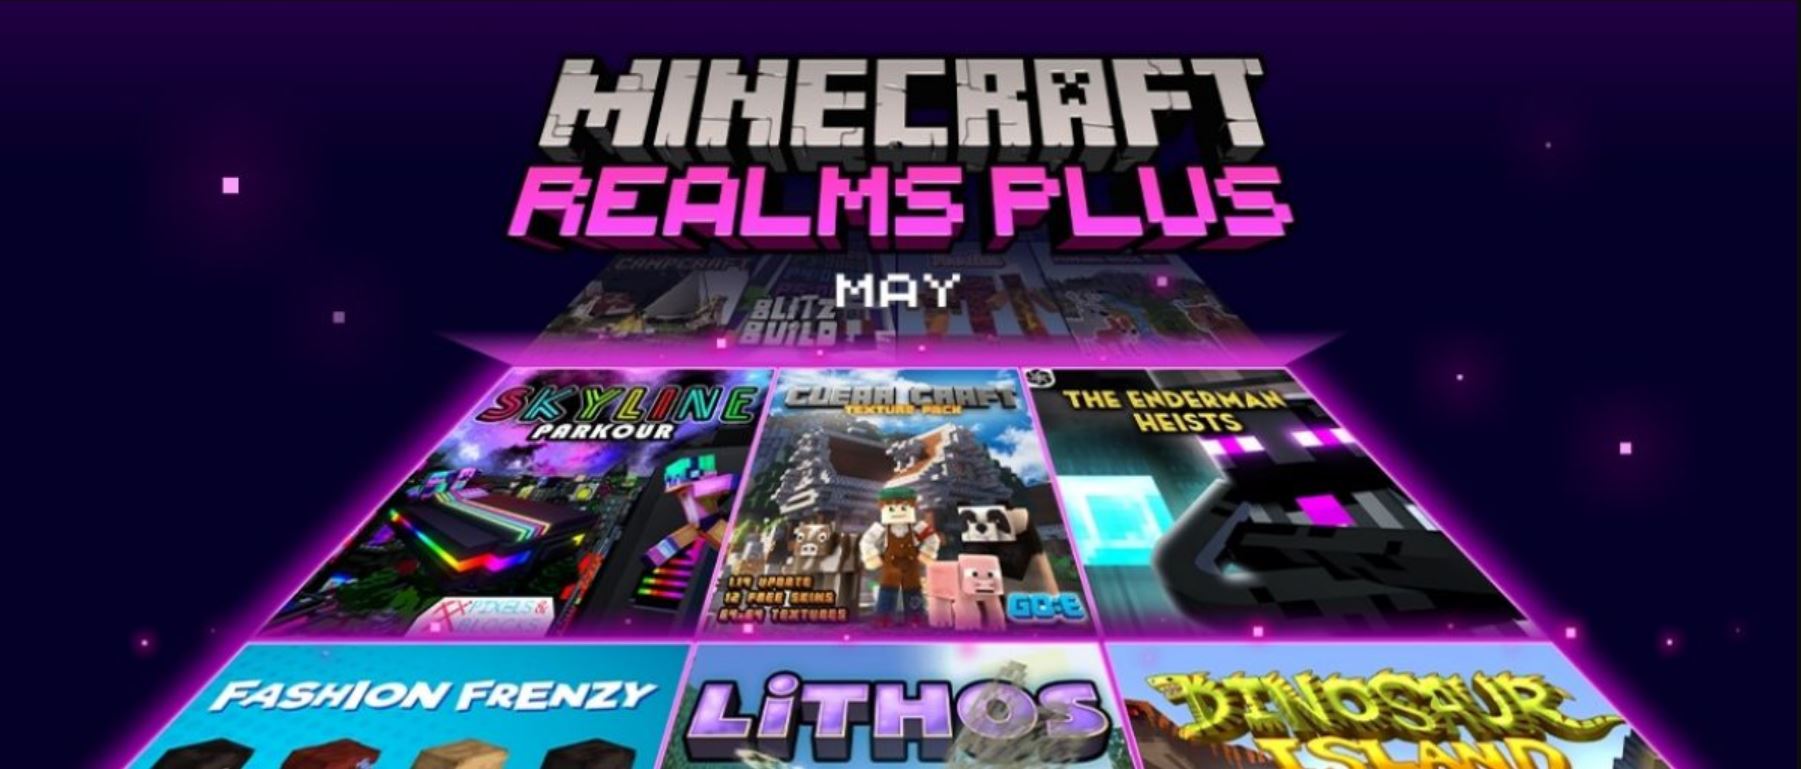 Minecraft Realms Plus May: New Gamemodes and Maps Added + 40 Free Skins!